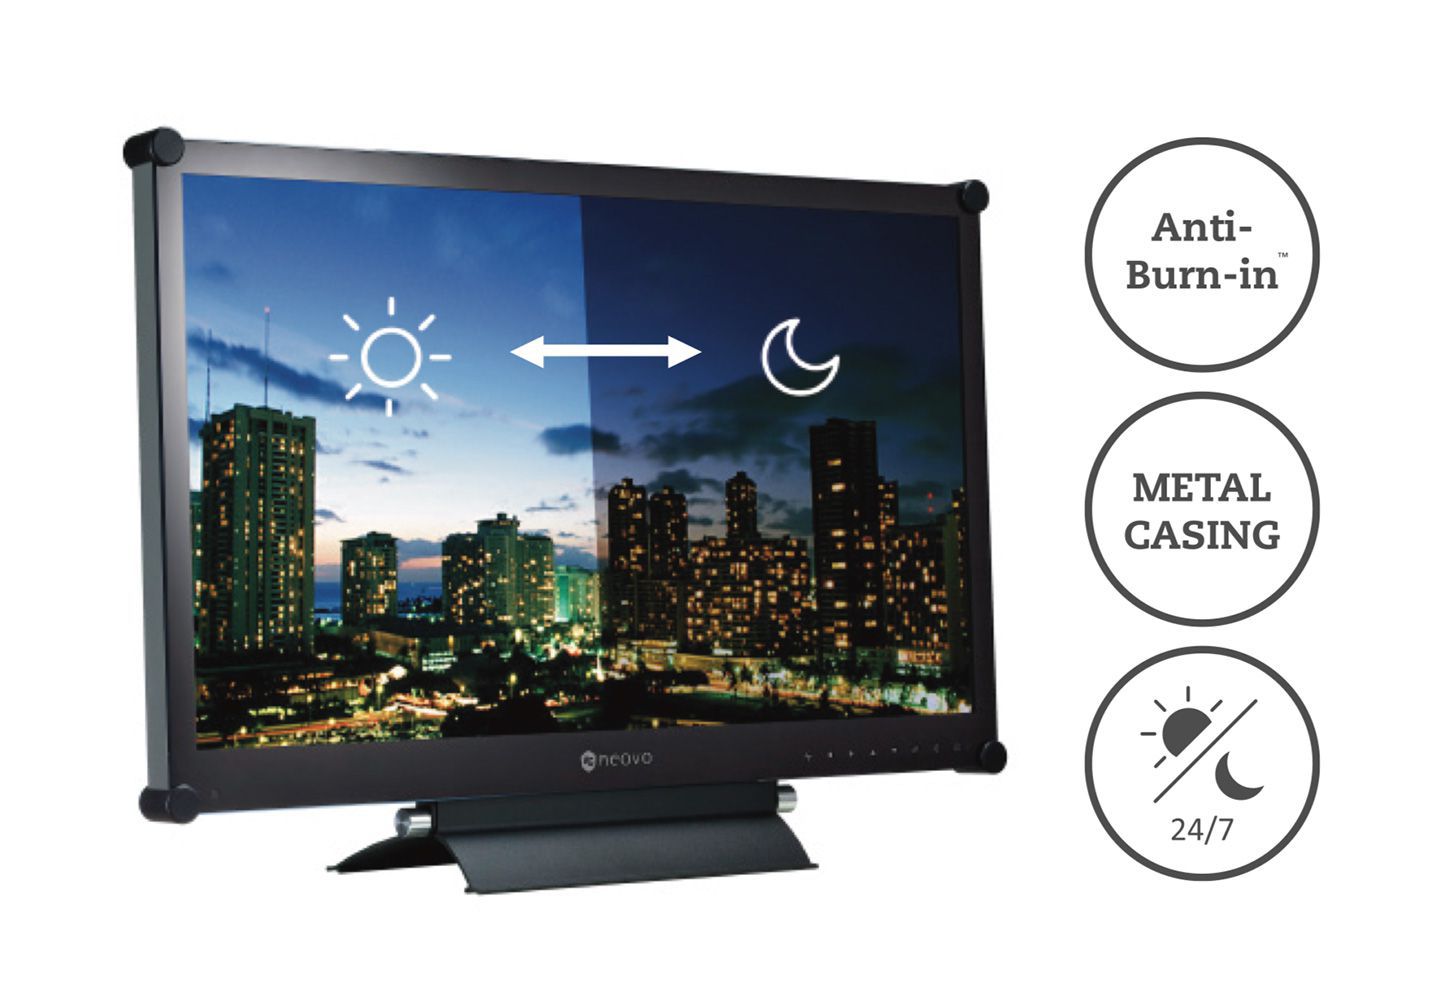 RX-24G security monitor features ant-burn-in, metal casing for 24/7 use.